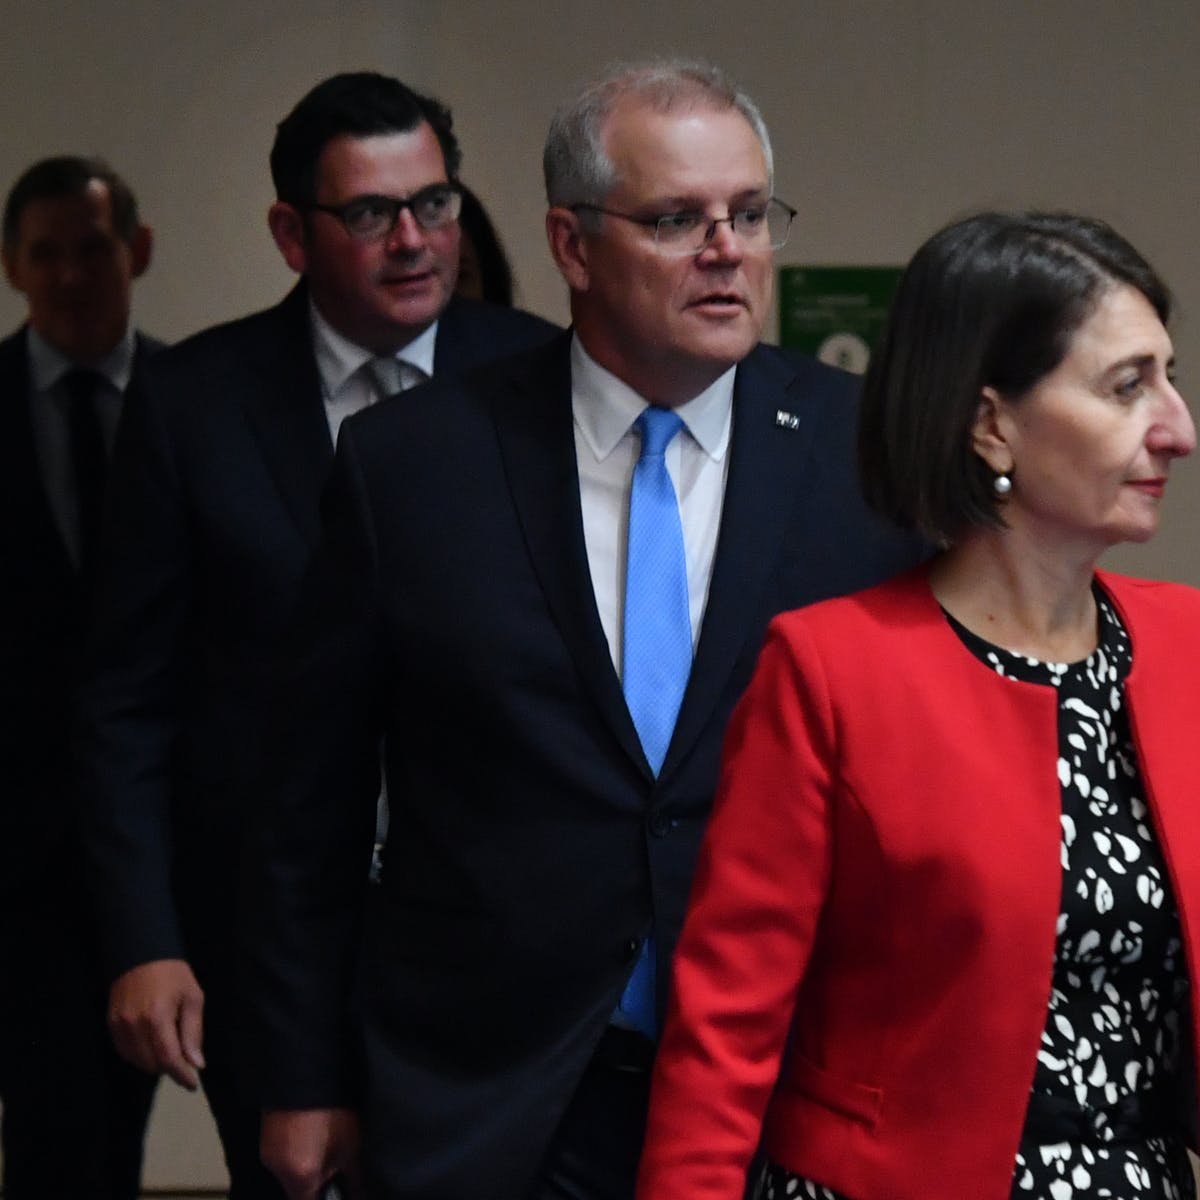 Australian Prime Minister Morrison said over the weekend that shut borders between Australian states must reopen once 80% double-vaccination targets are reached. 